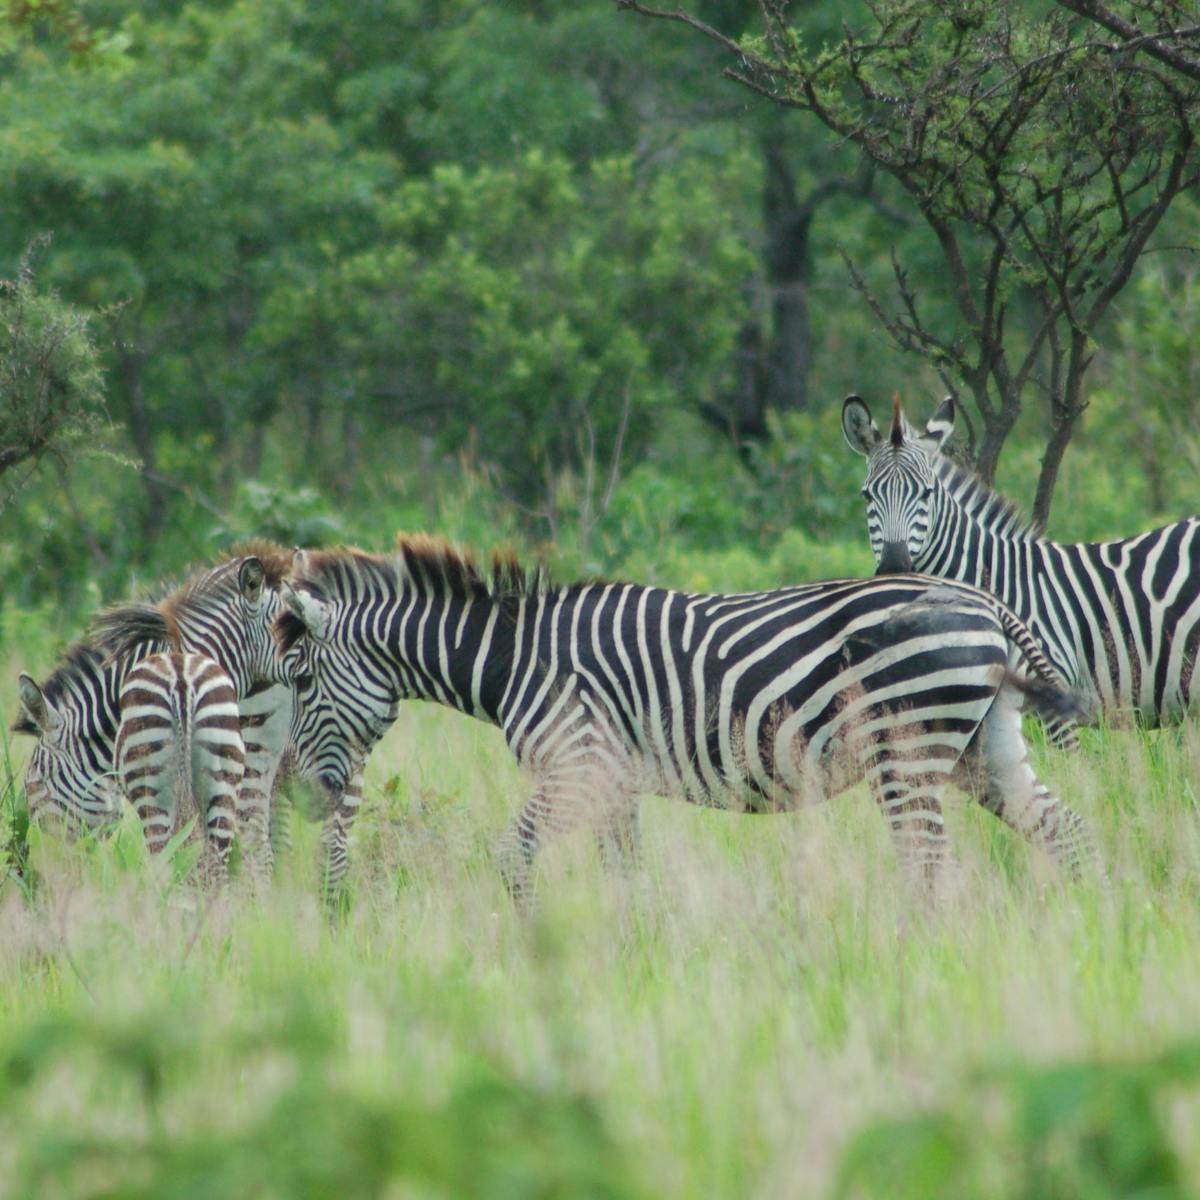 Zebra's stripes are a no fly zone for flies